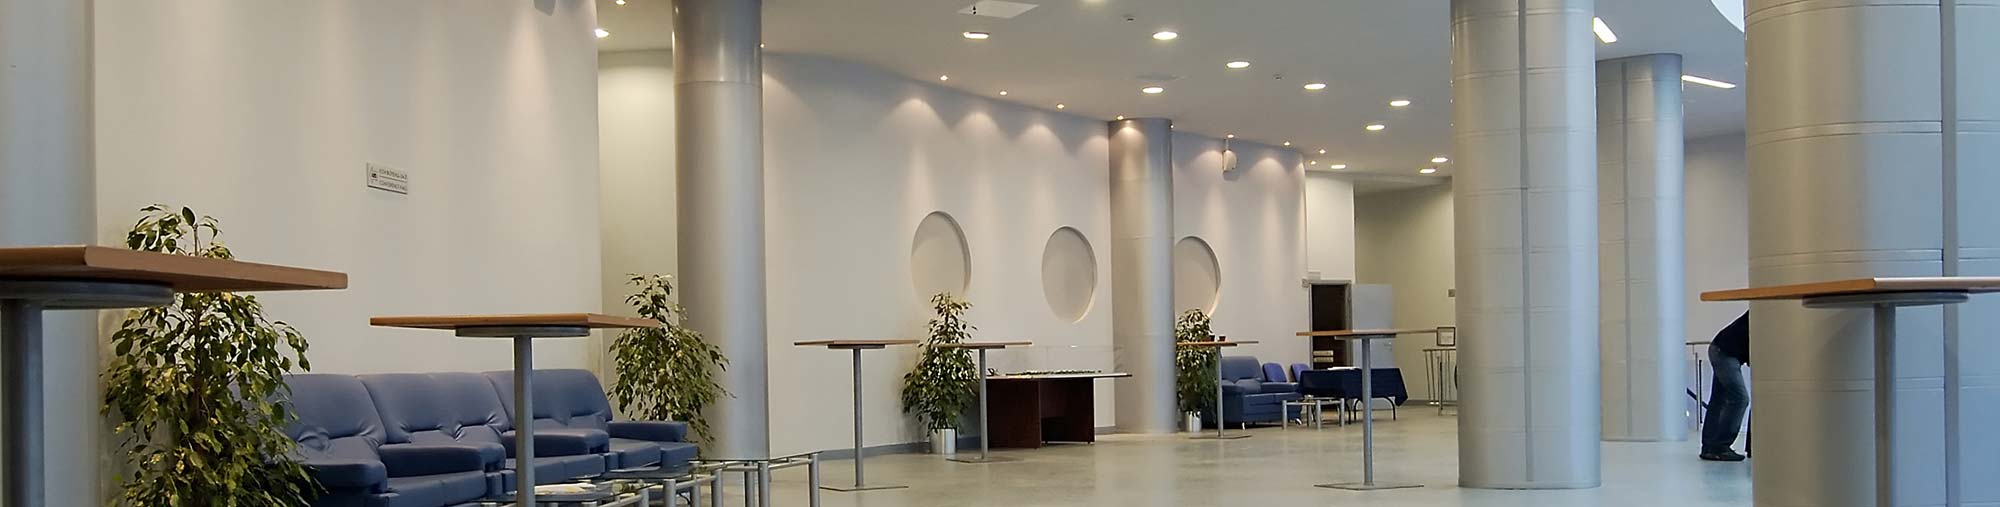 Foyer with pillars in office building